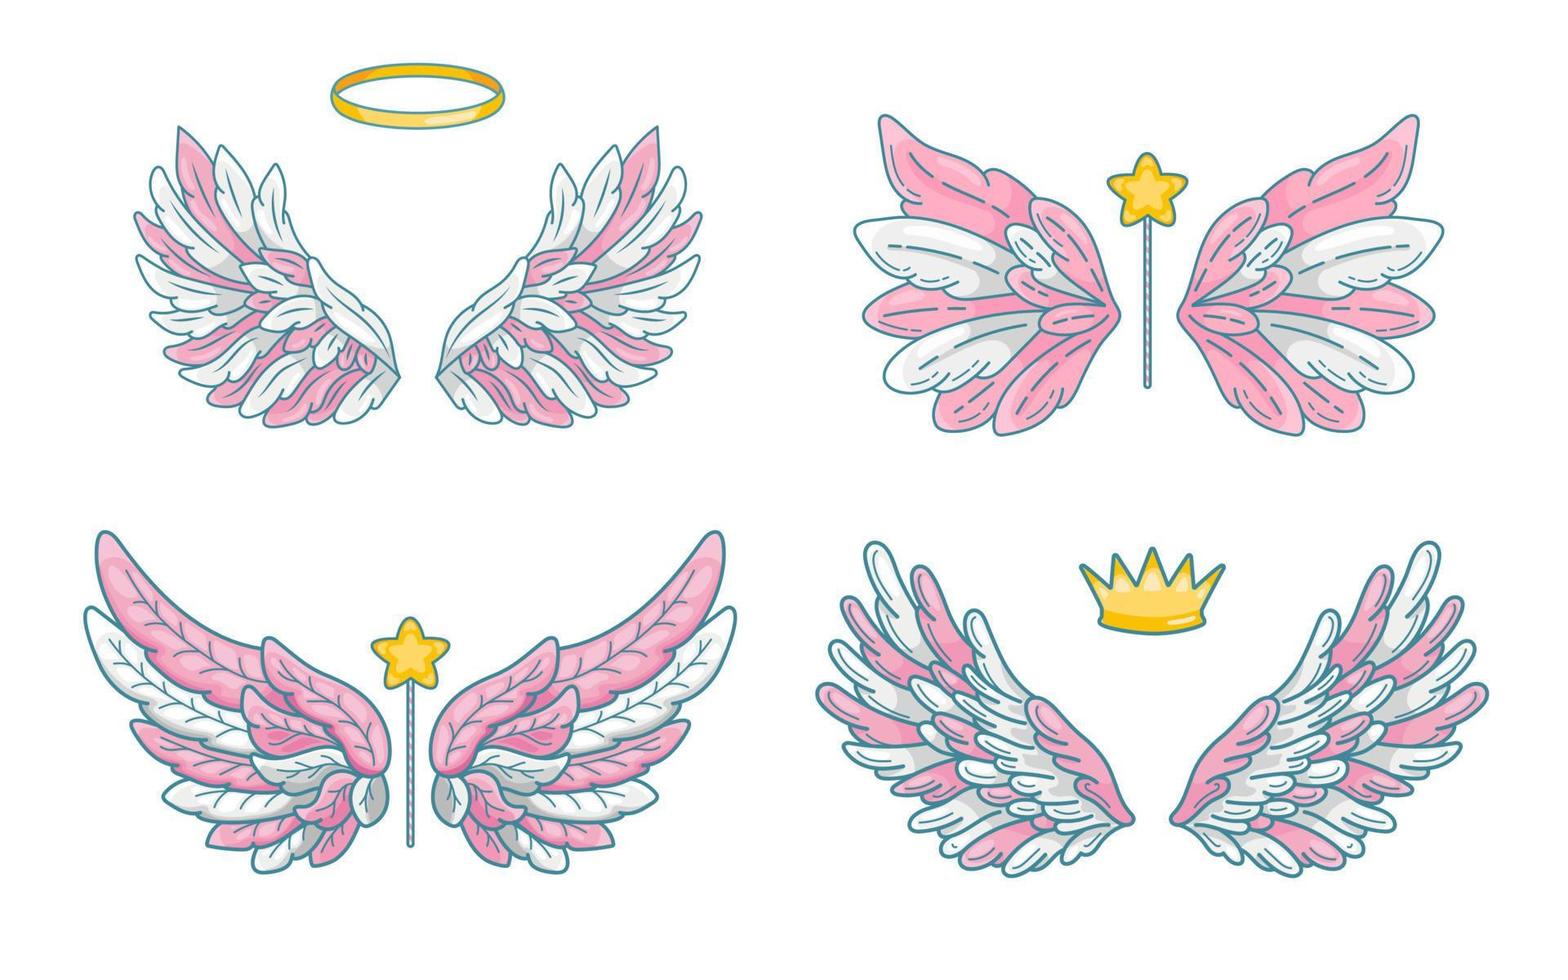 Collection of angel wings in cute little princess style, pink and white palette. Magic accessories - wand, crown and halo. Vector illustration isolated on white.